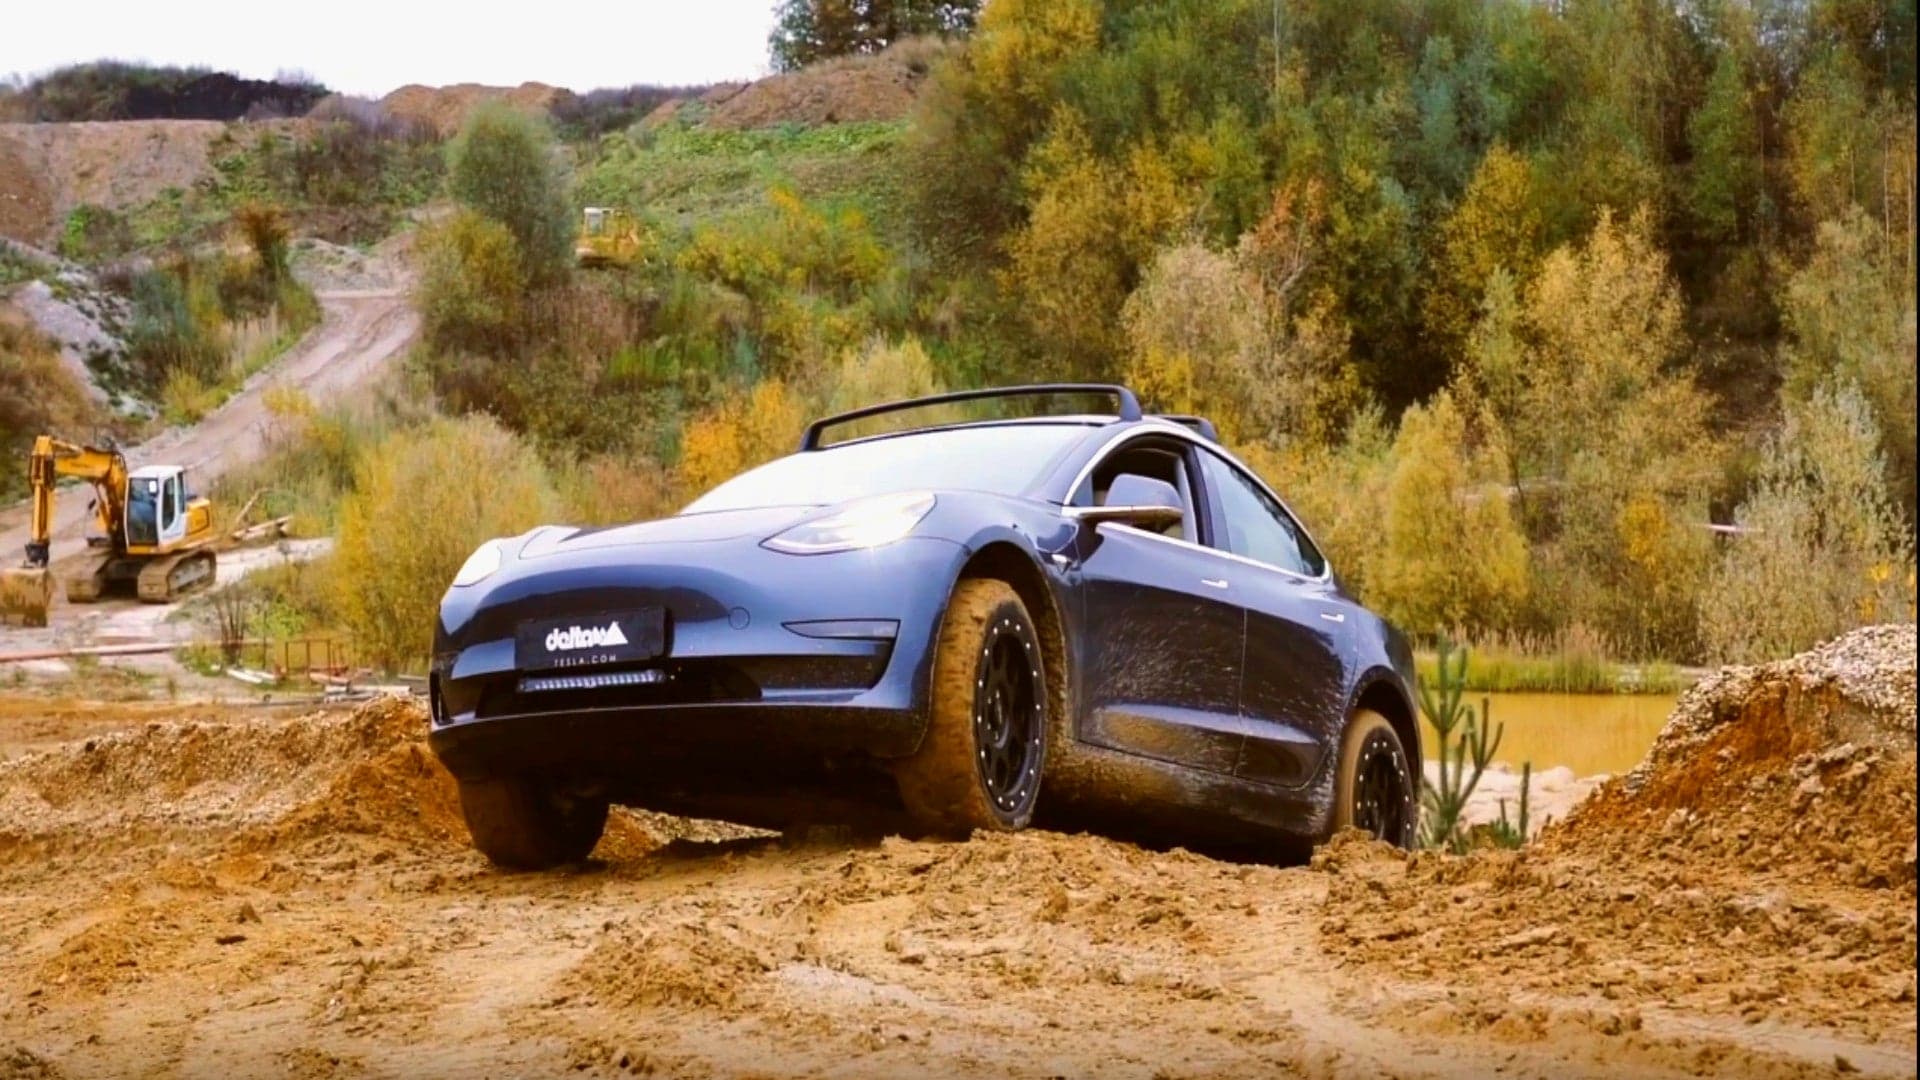 Tesla Model 3 Gets Rugged with Aftermarket Off-Road Package from Delta4x4